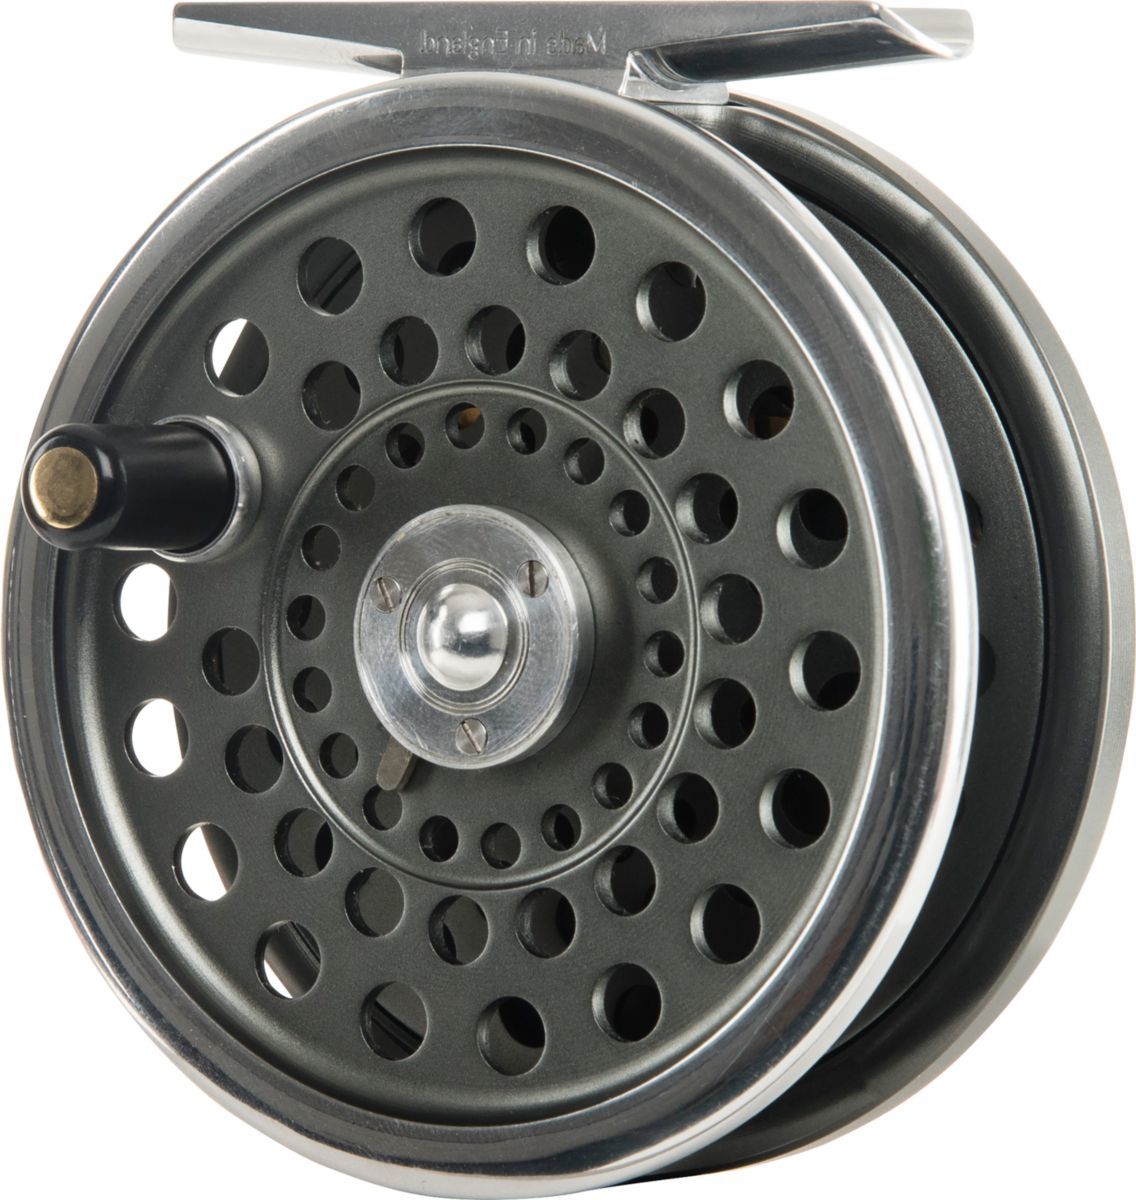 Hardy® Marquis Lightweight Fly Reel